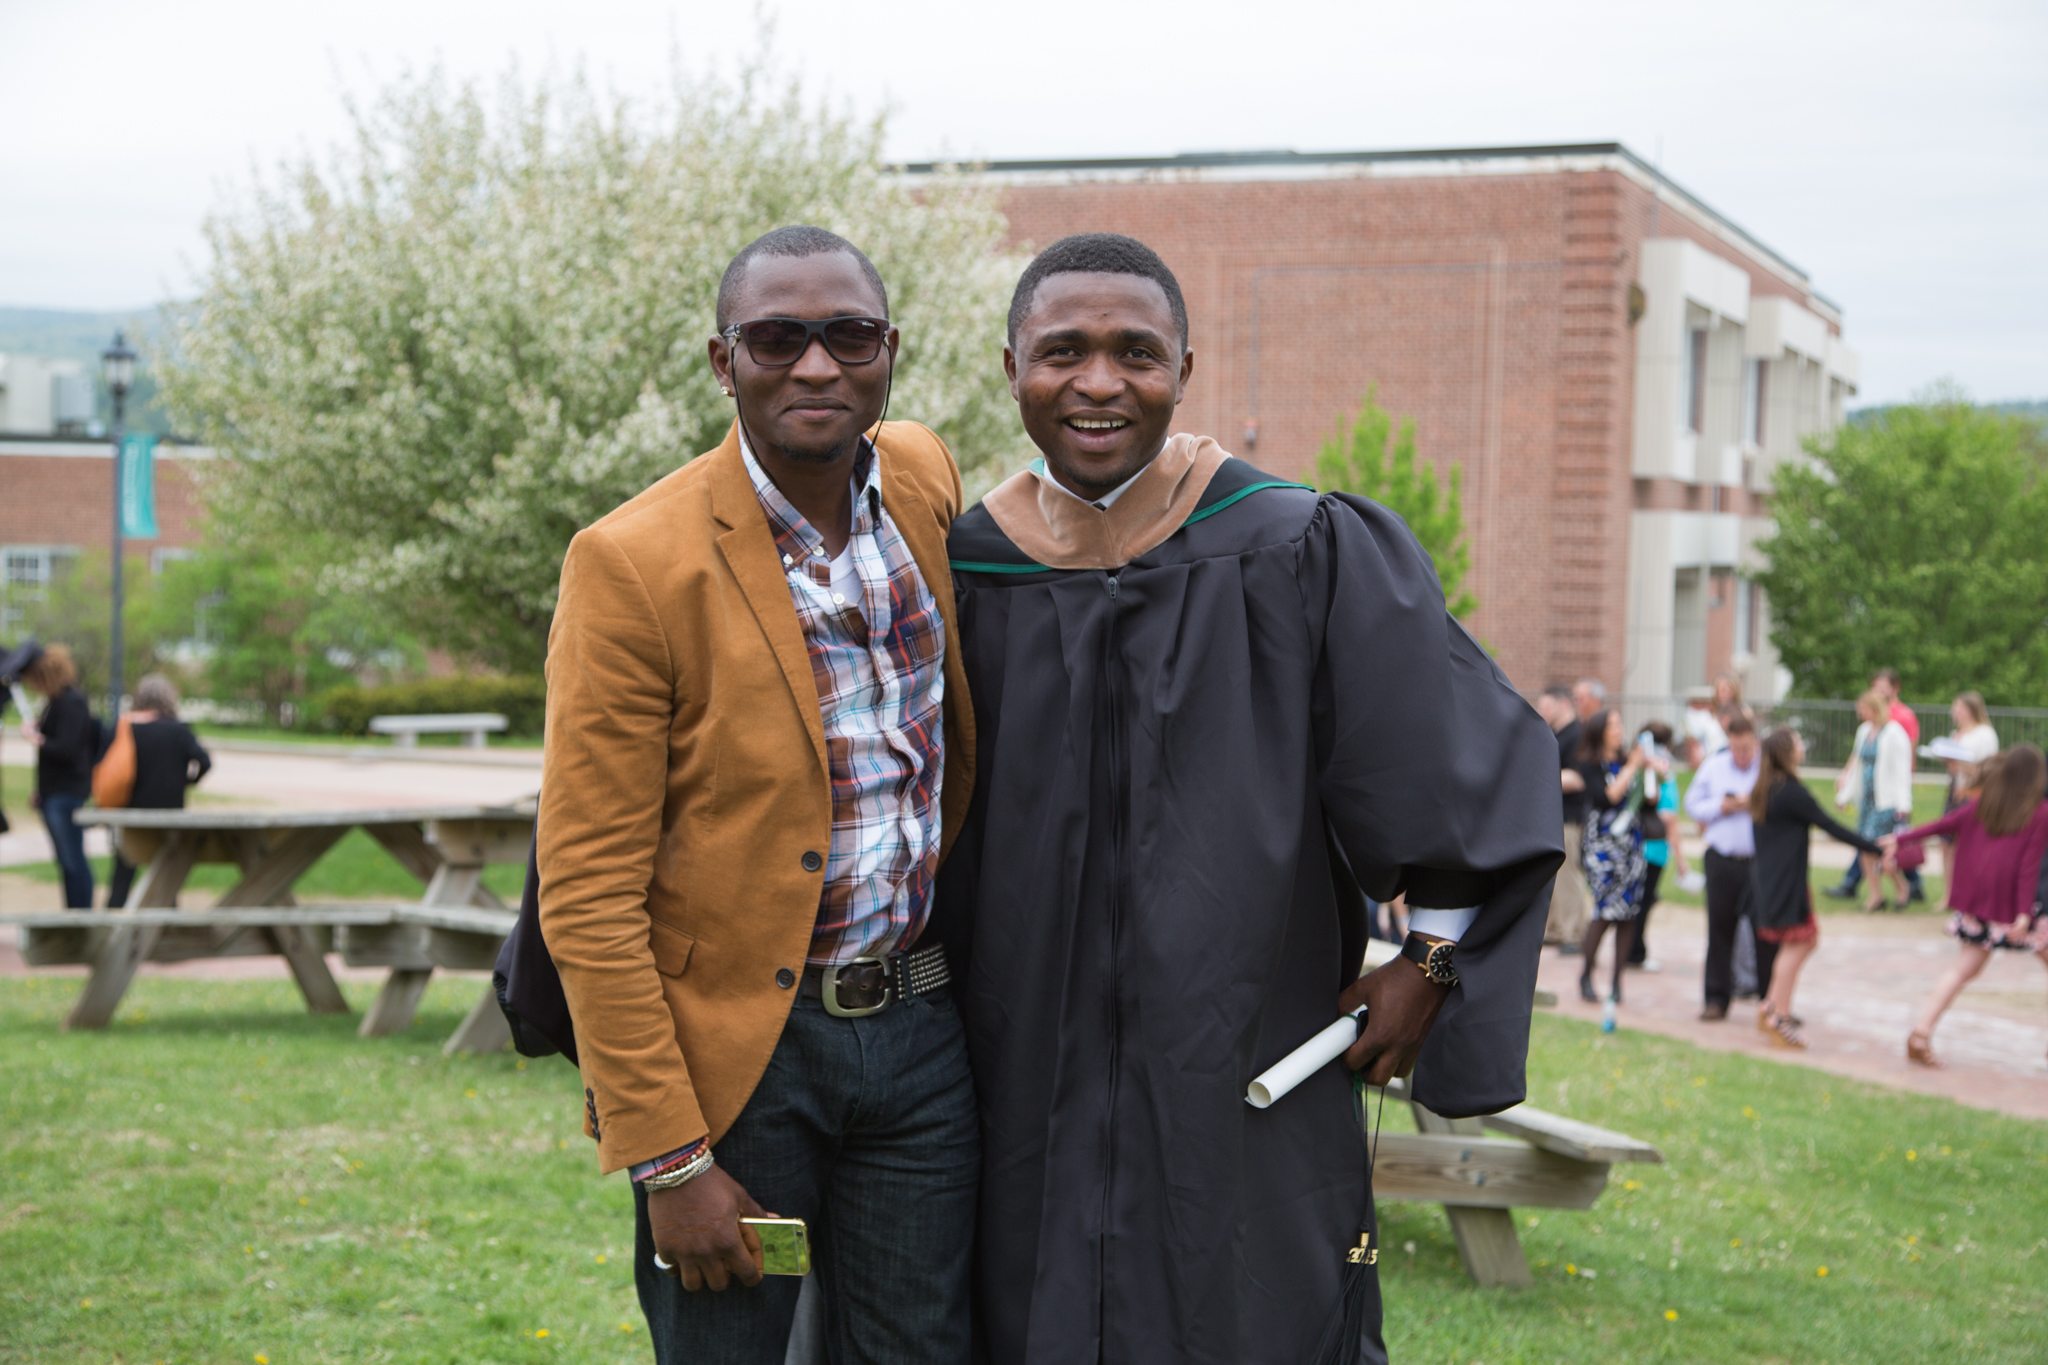 Proud families joined their graduates to honor their achievements. Kaleb Hart ’11 photo.